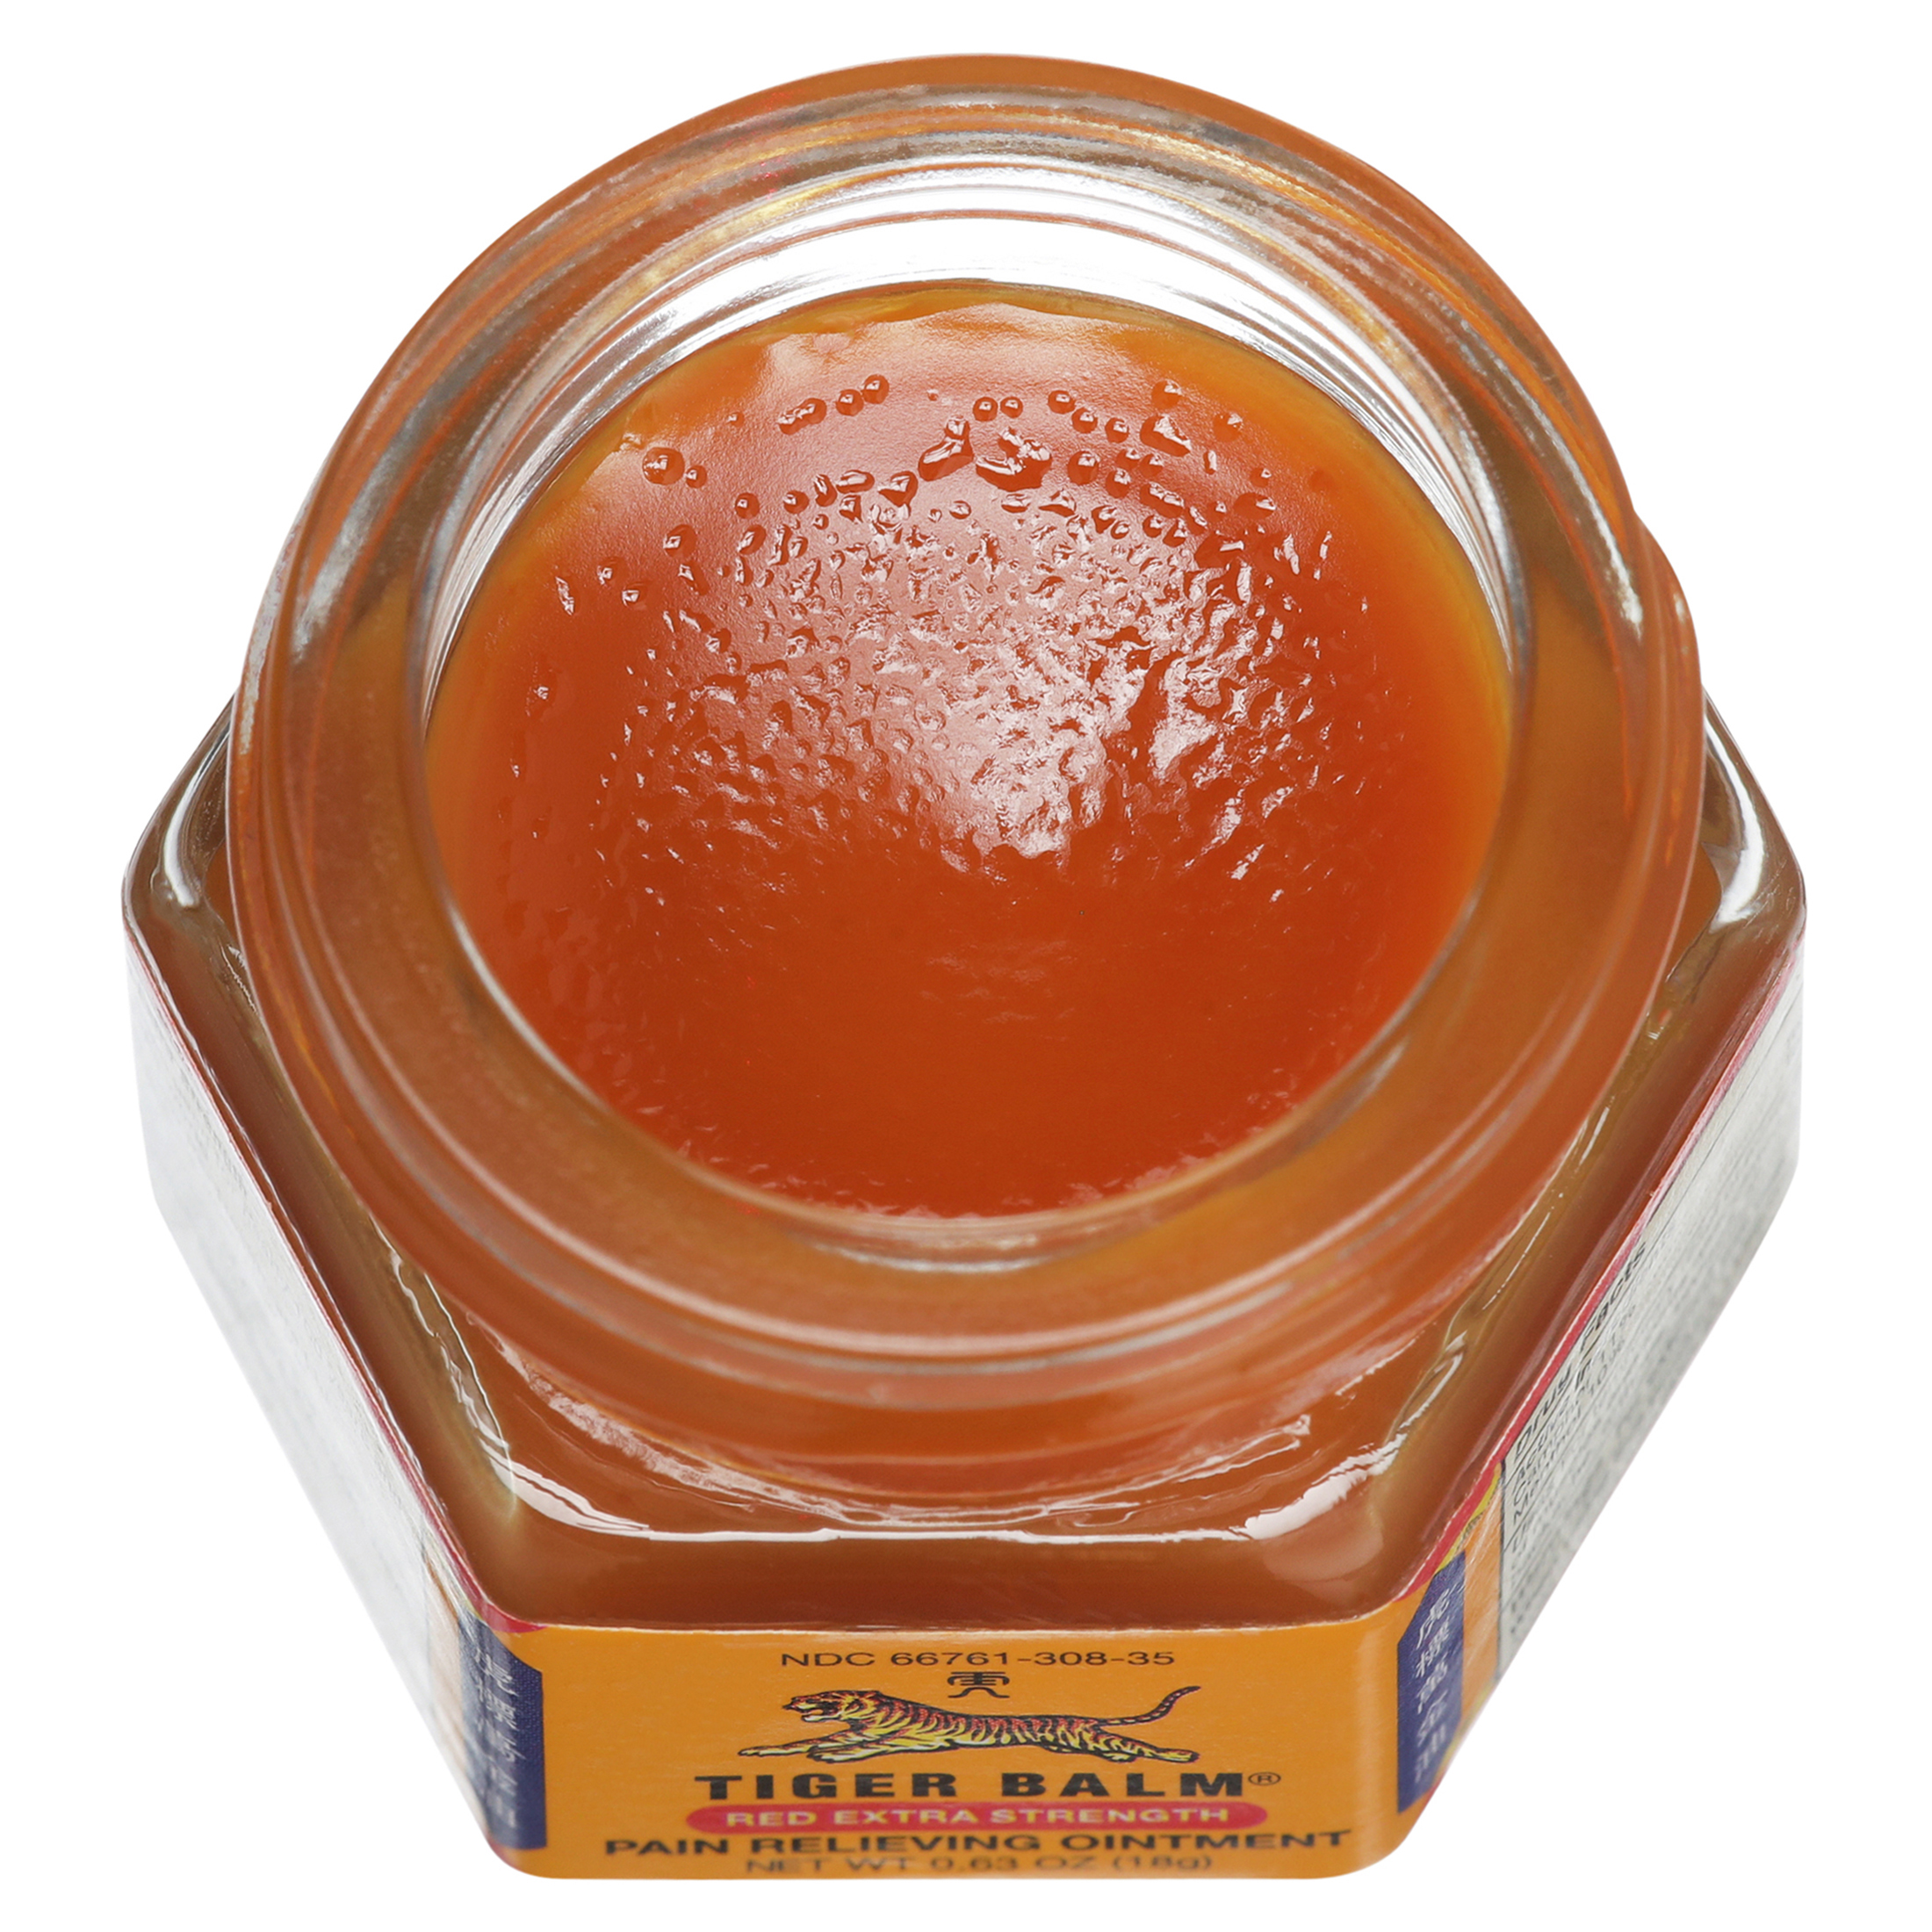 Tiger Balm Extra Strength Pain Relieving Ointment, 0.63 oz Jar for Arthritis Joint Pain Backaches Strains and Sore Muscles - image 5 of 9